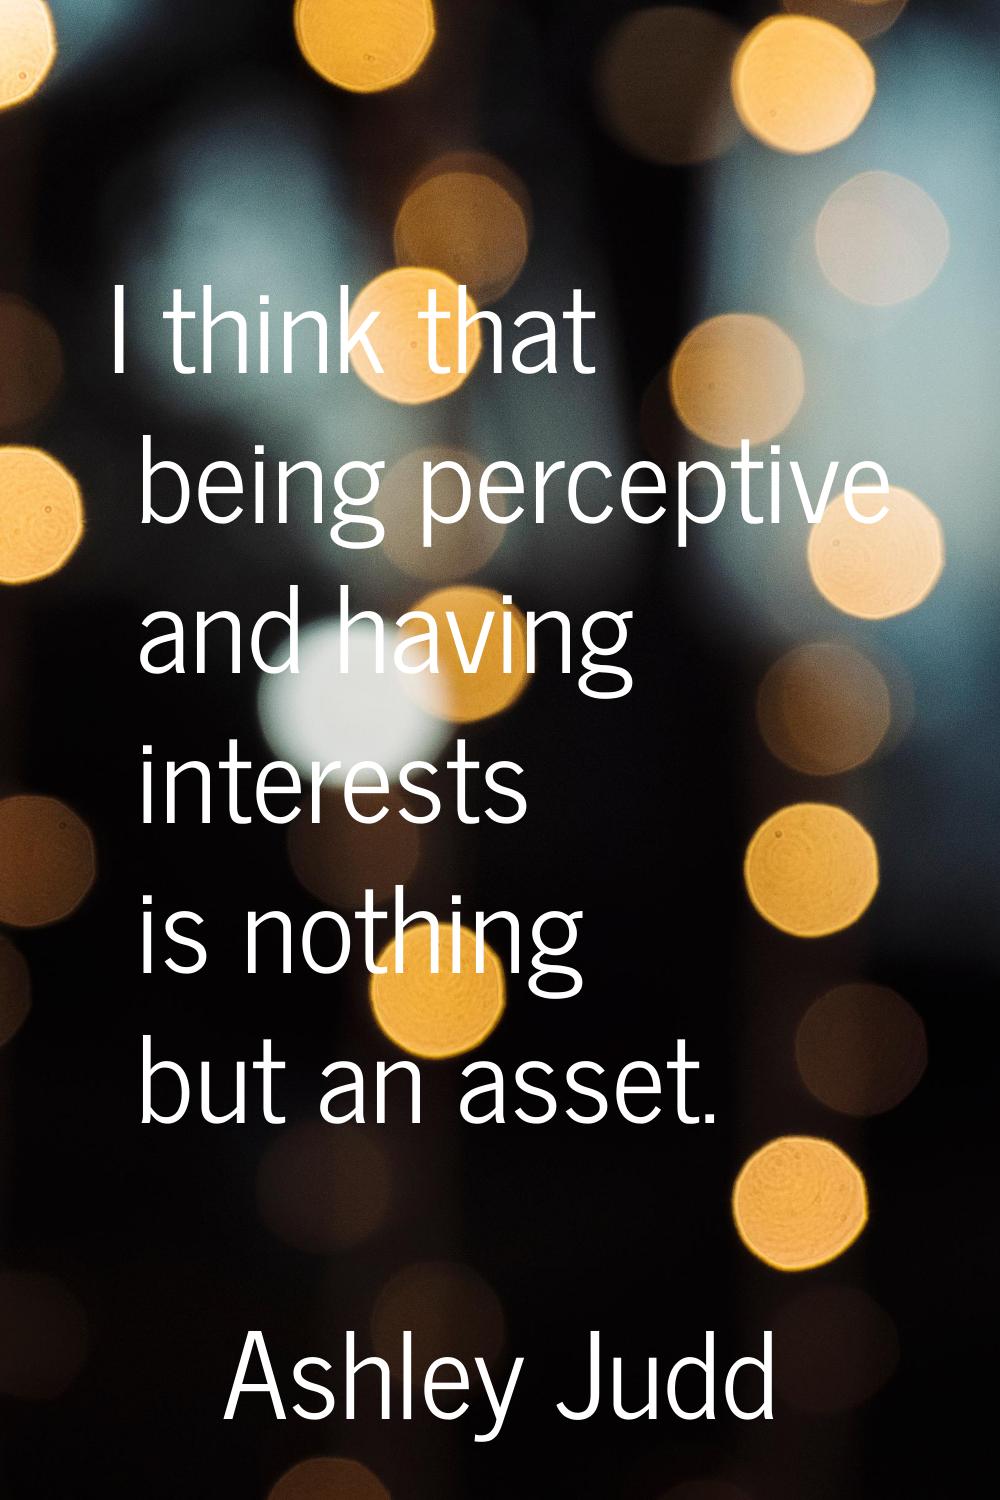 I think that being perceptive and having interests is nothing but an asset.